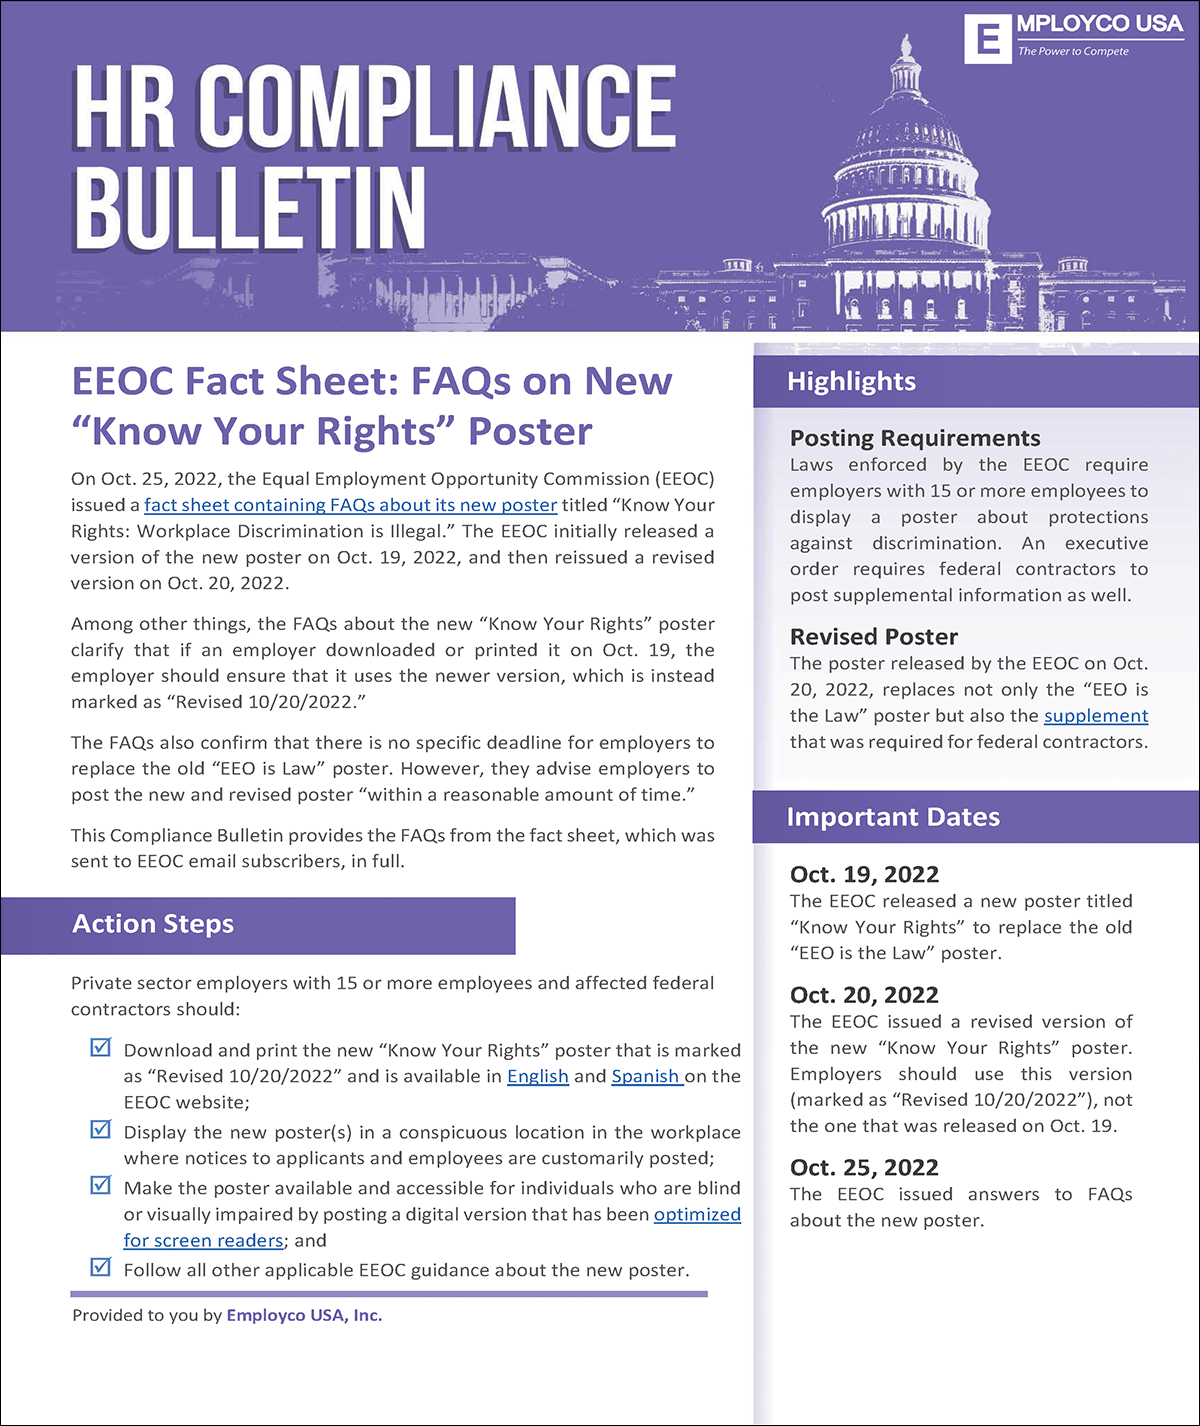 HR Compliance Bulletin: FAQs on New “Know Your Rights” Poster